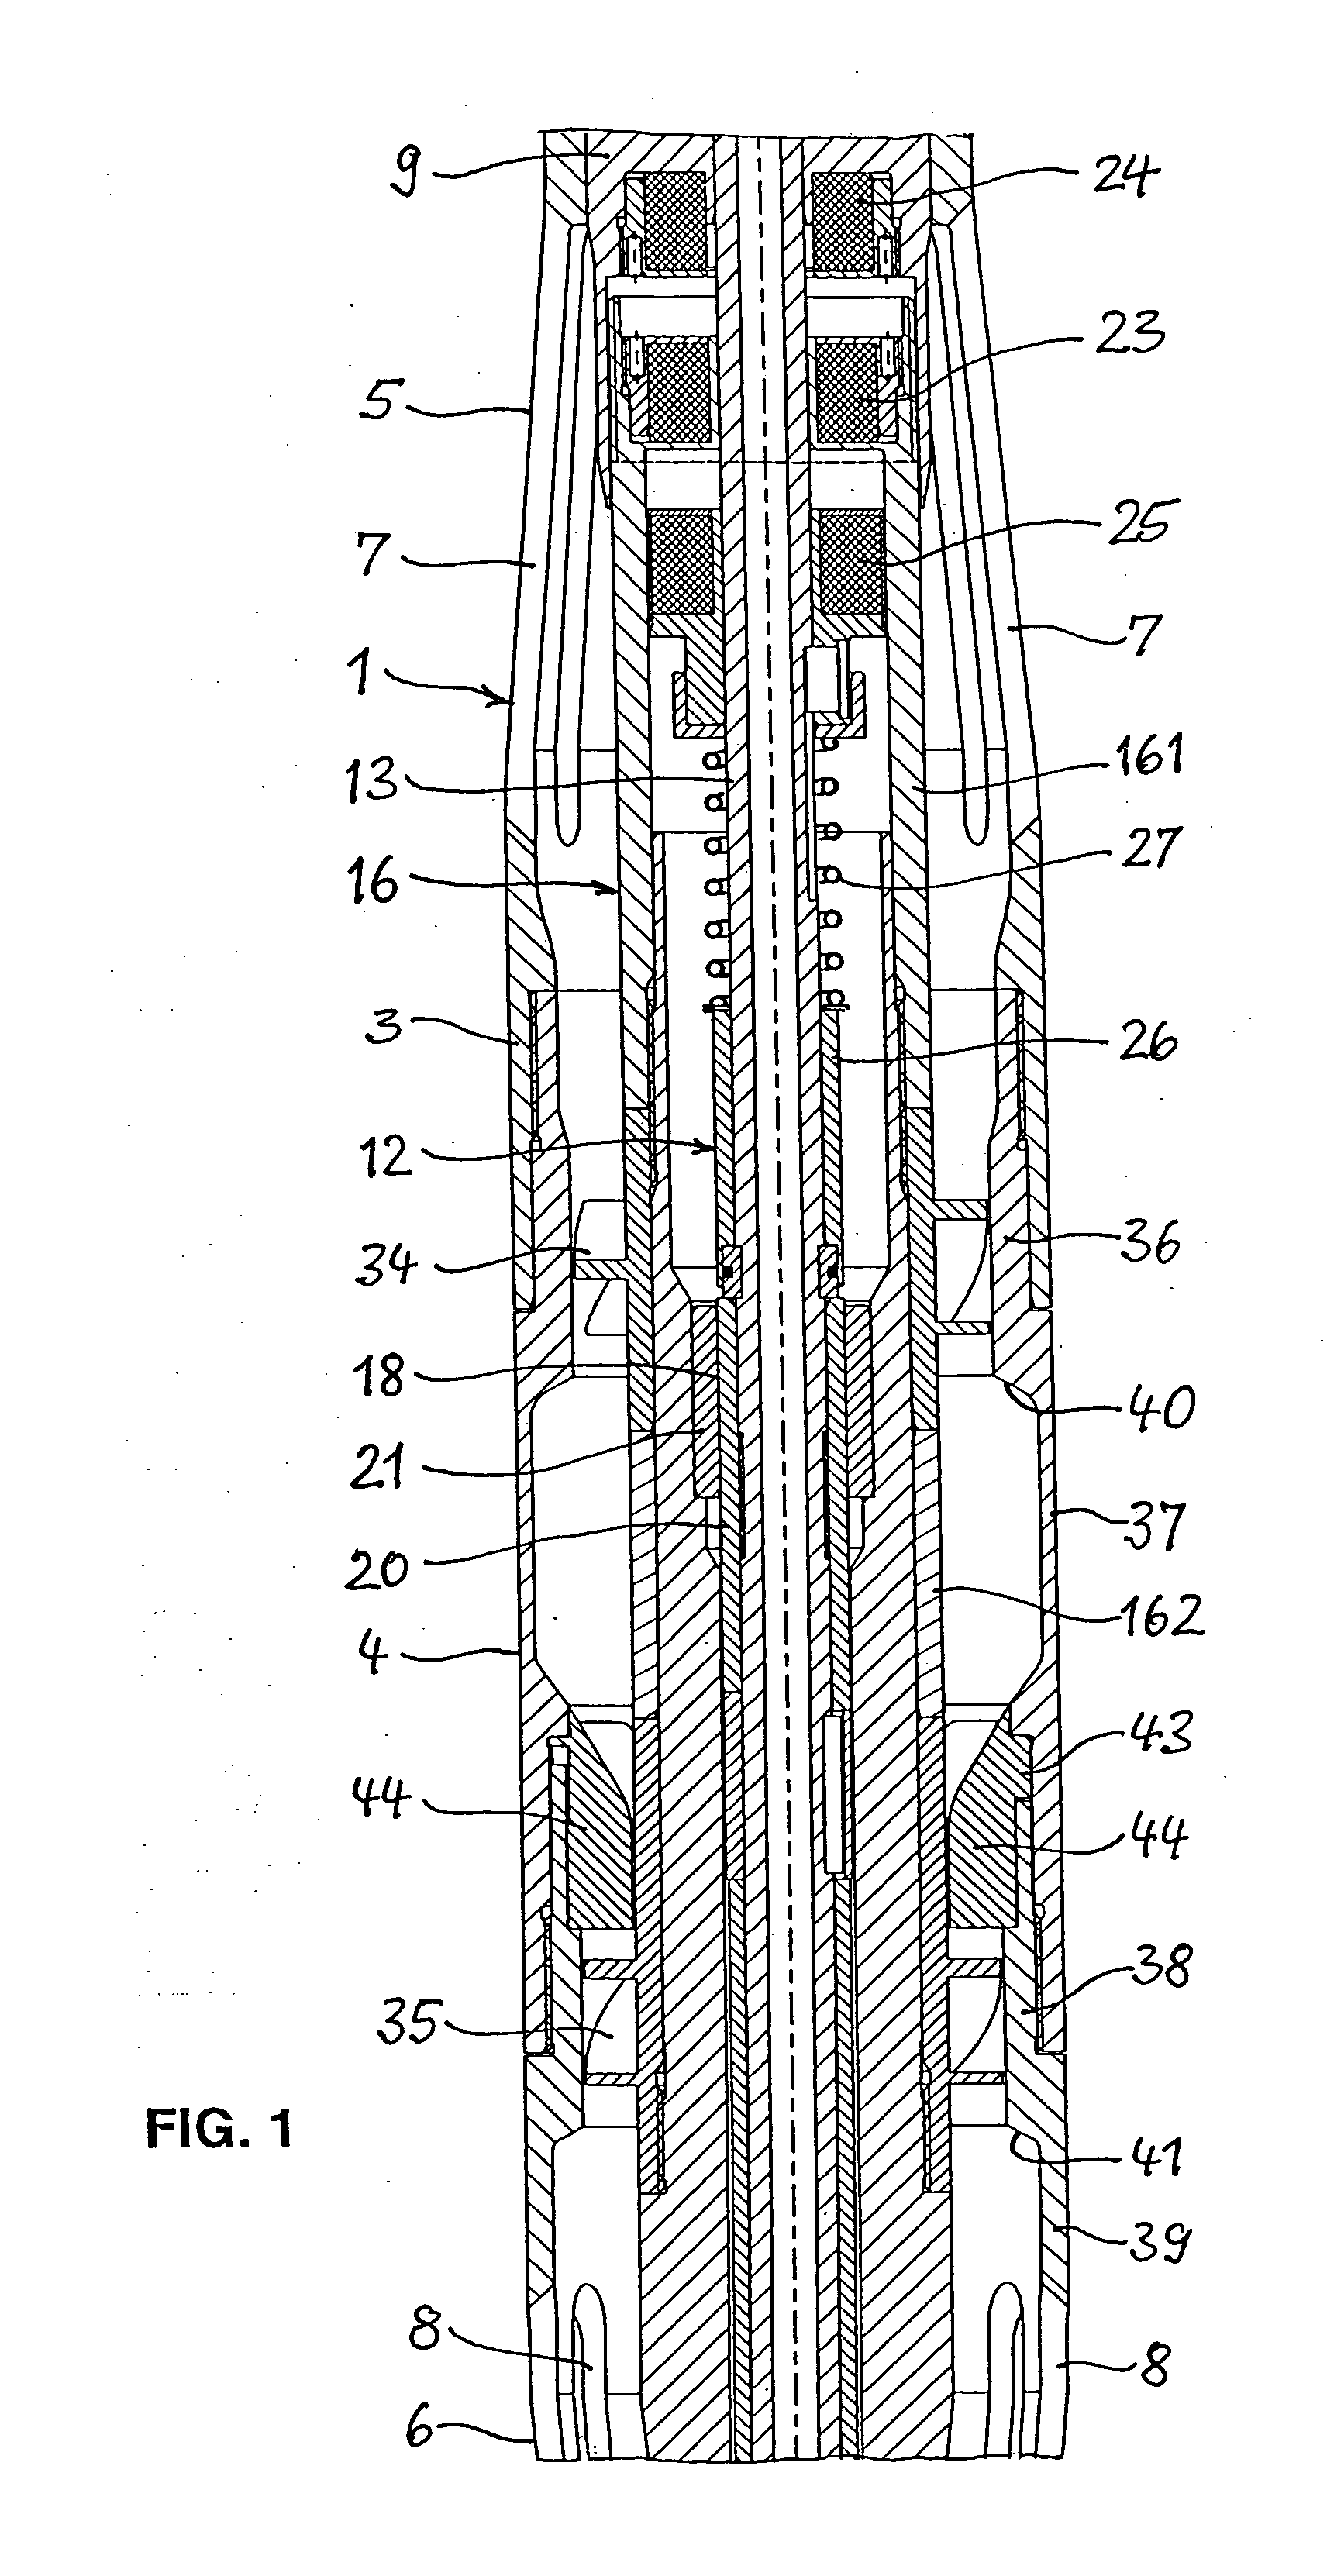 Turbine for driving a generator in a drill string